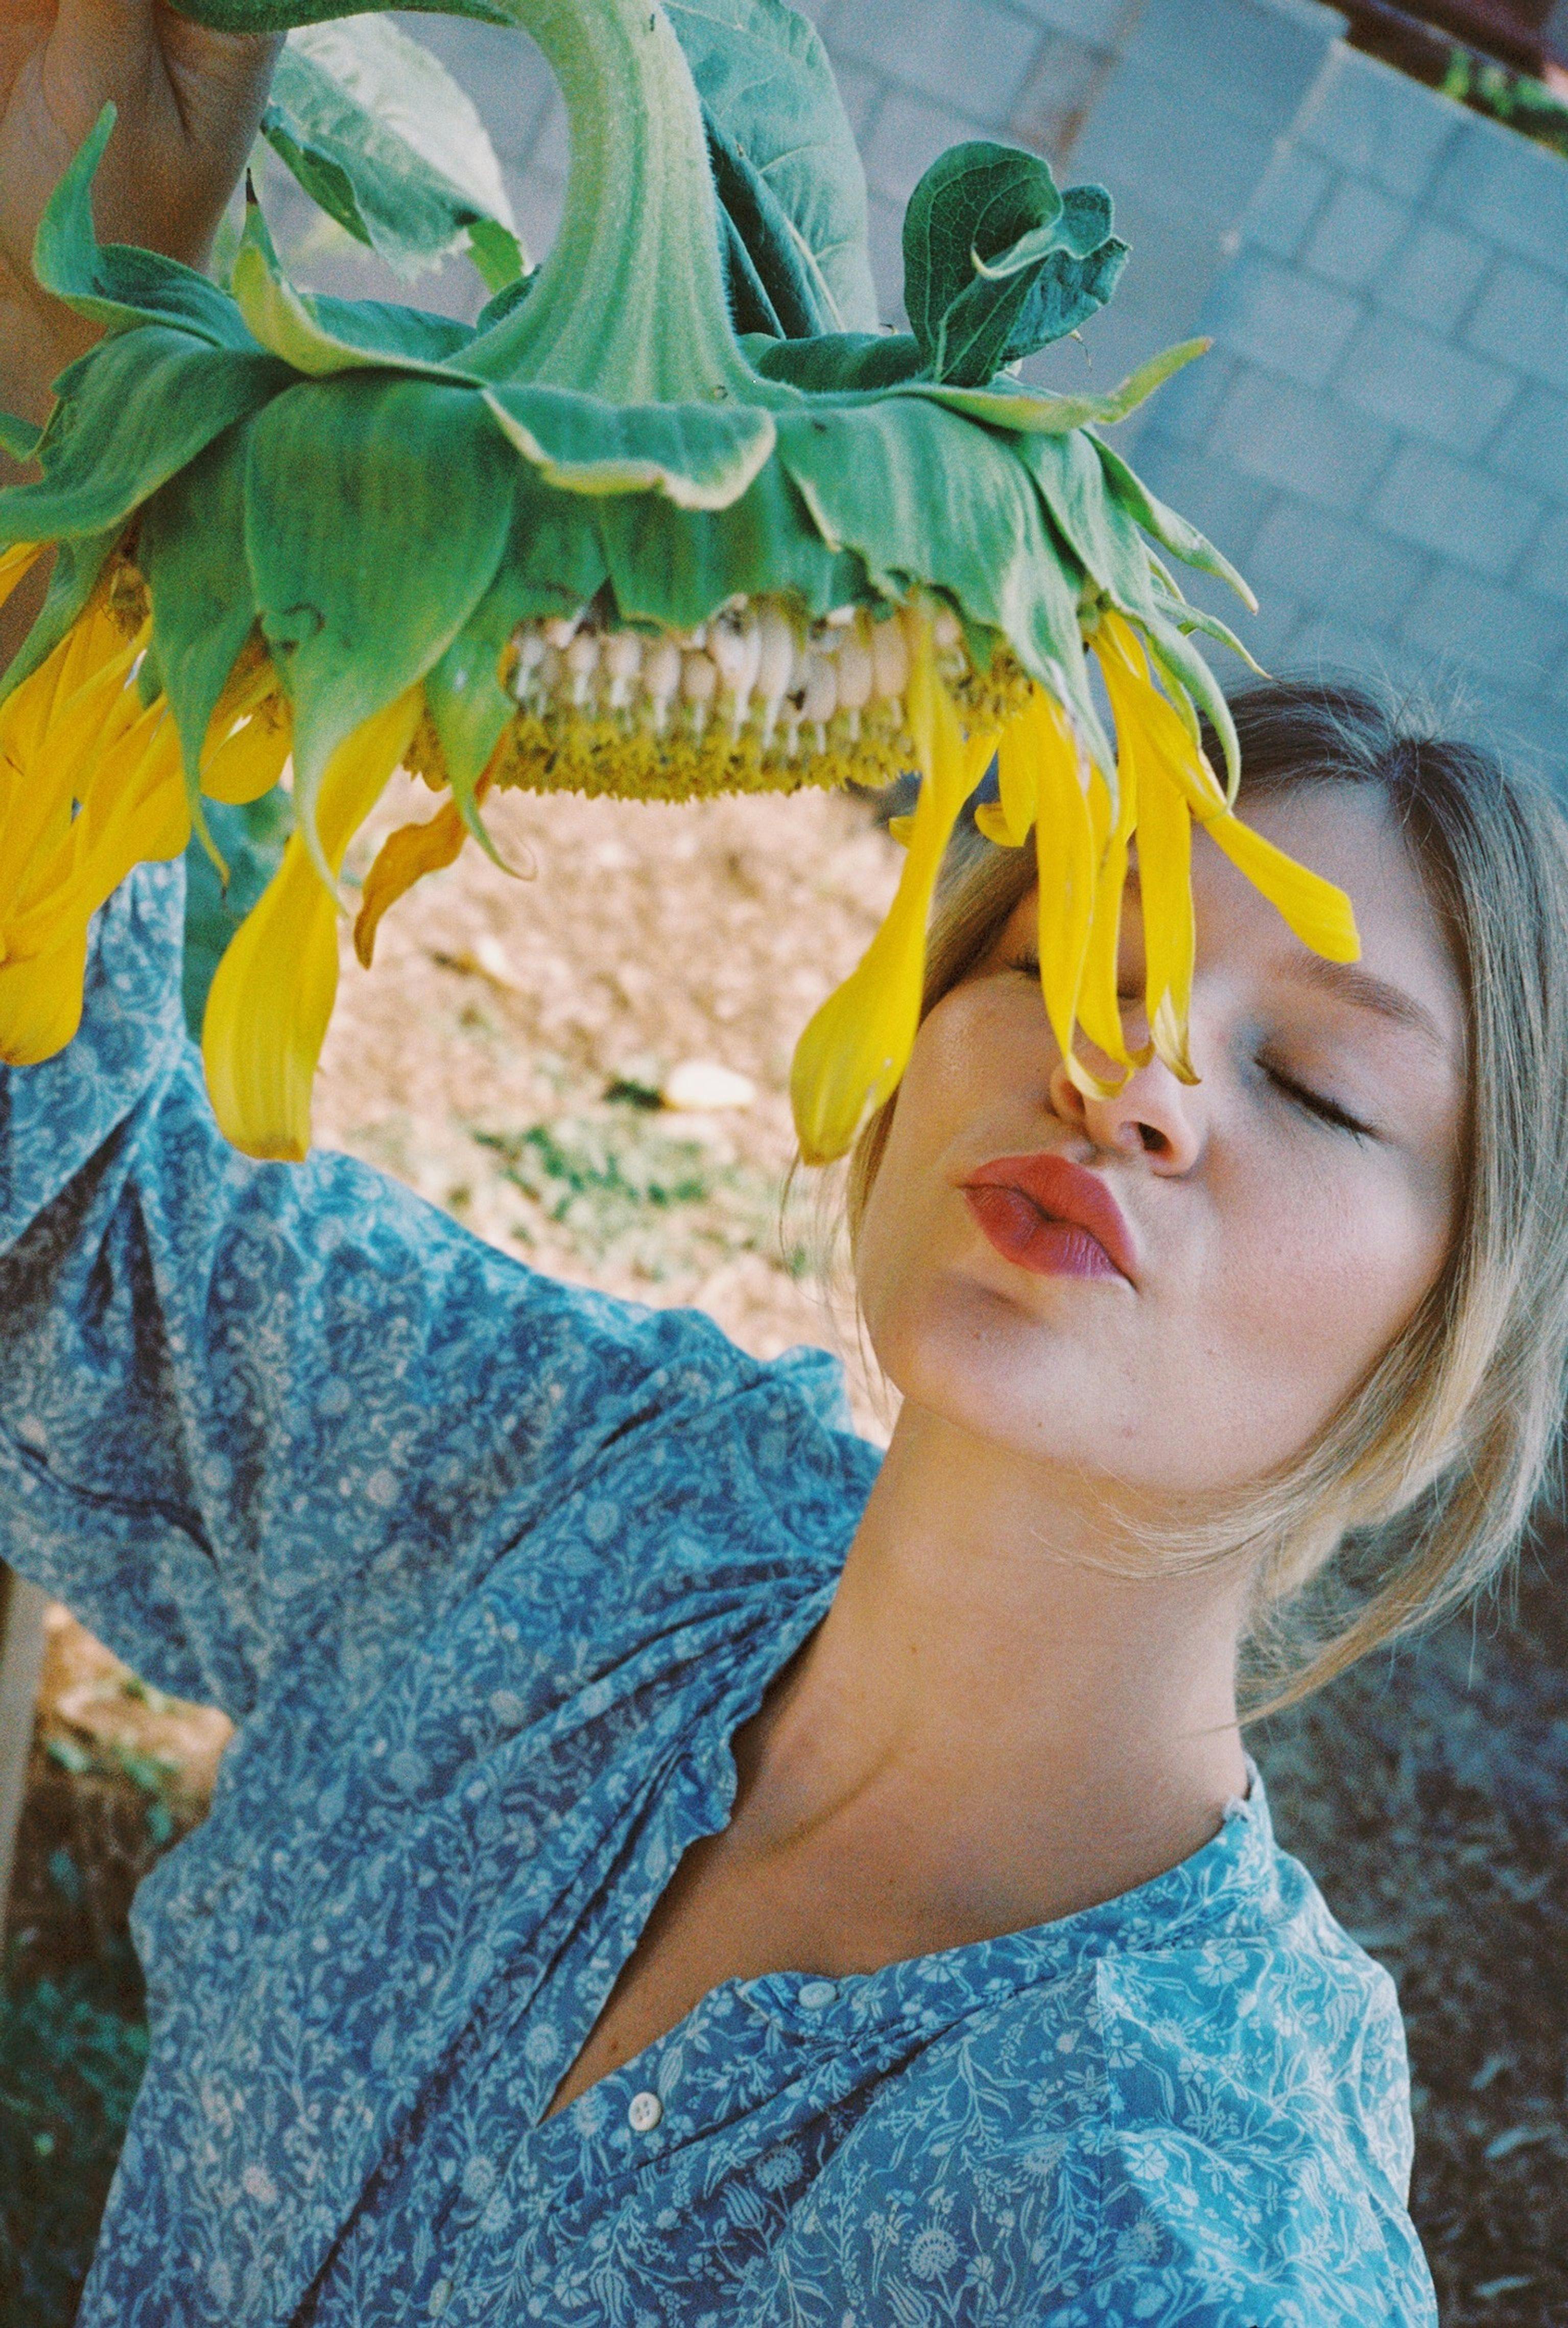 Self portrait of a blonde girl with a giant sunflower on film, by Natalie Carrasco